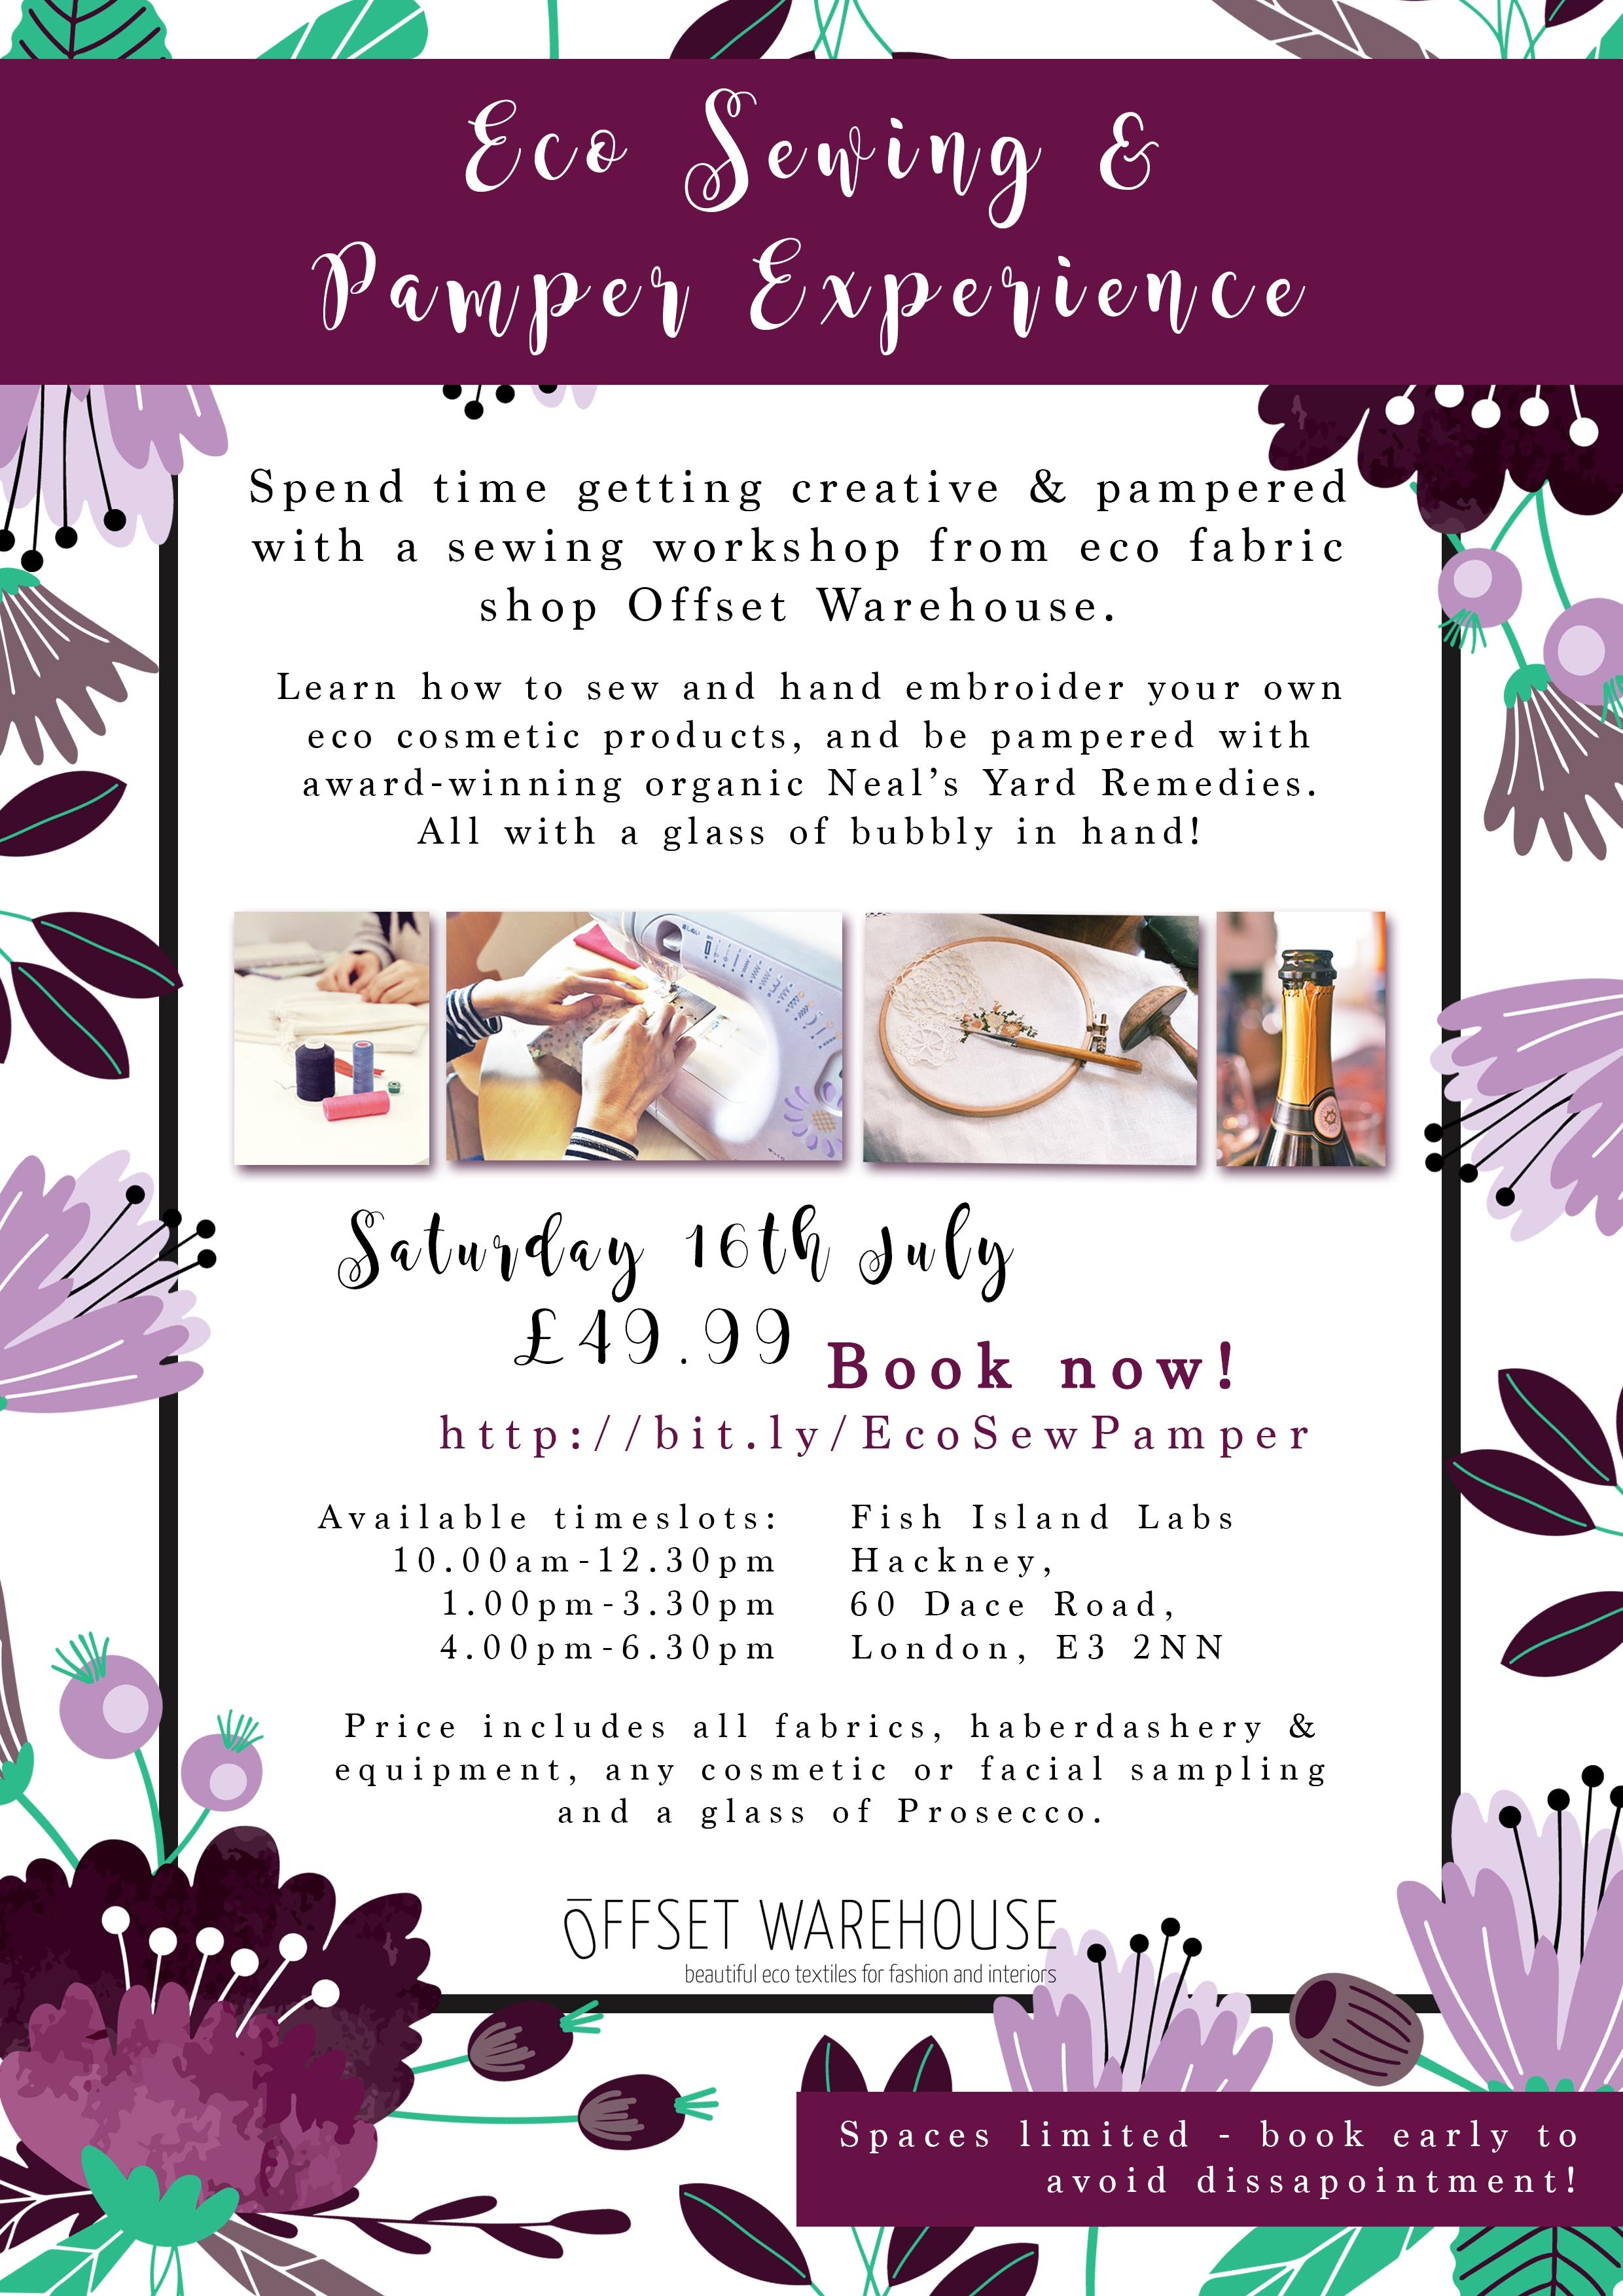 EVENT: Eco sewing & pamper experience with Offset Warehouse